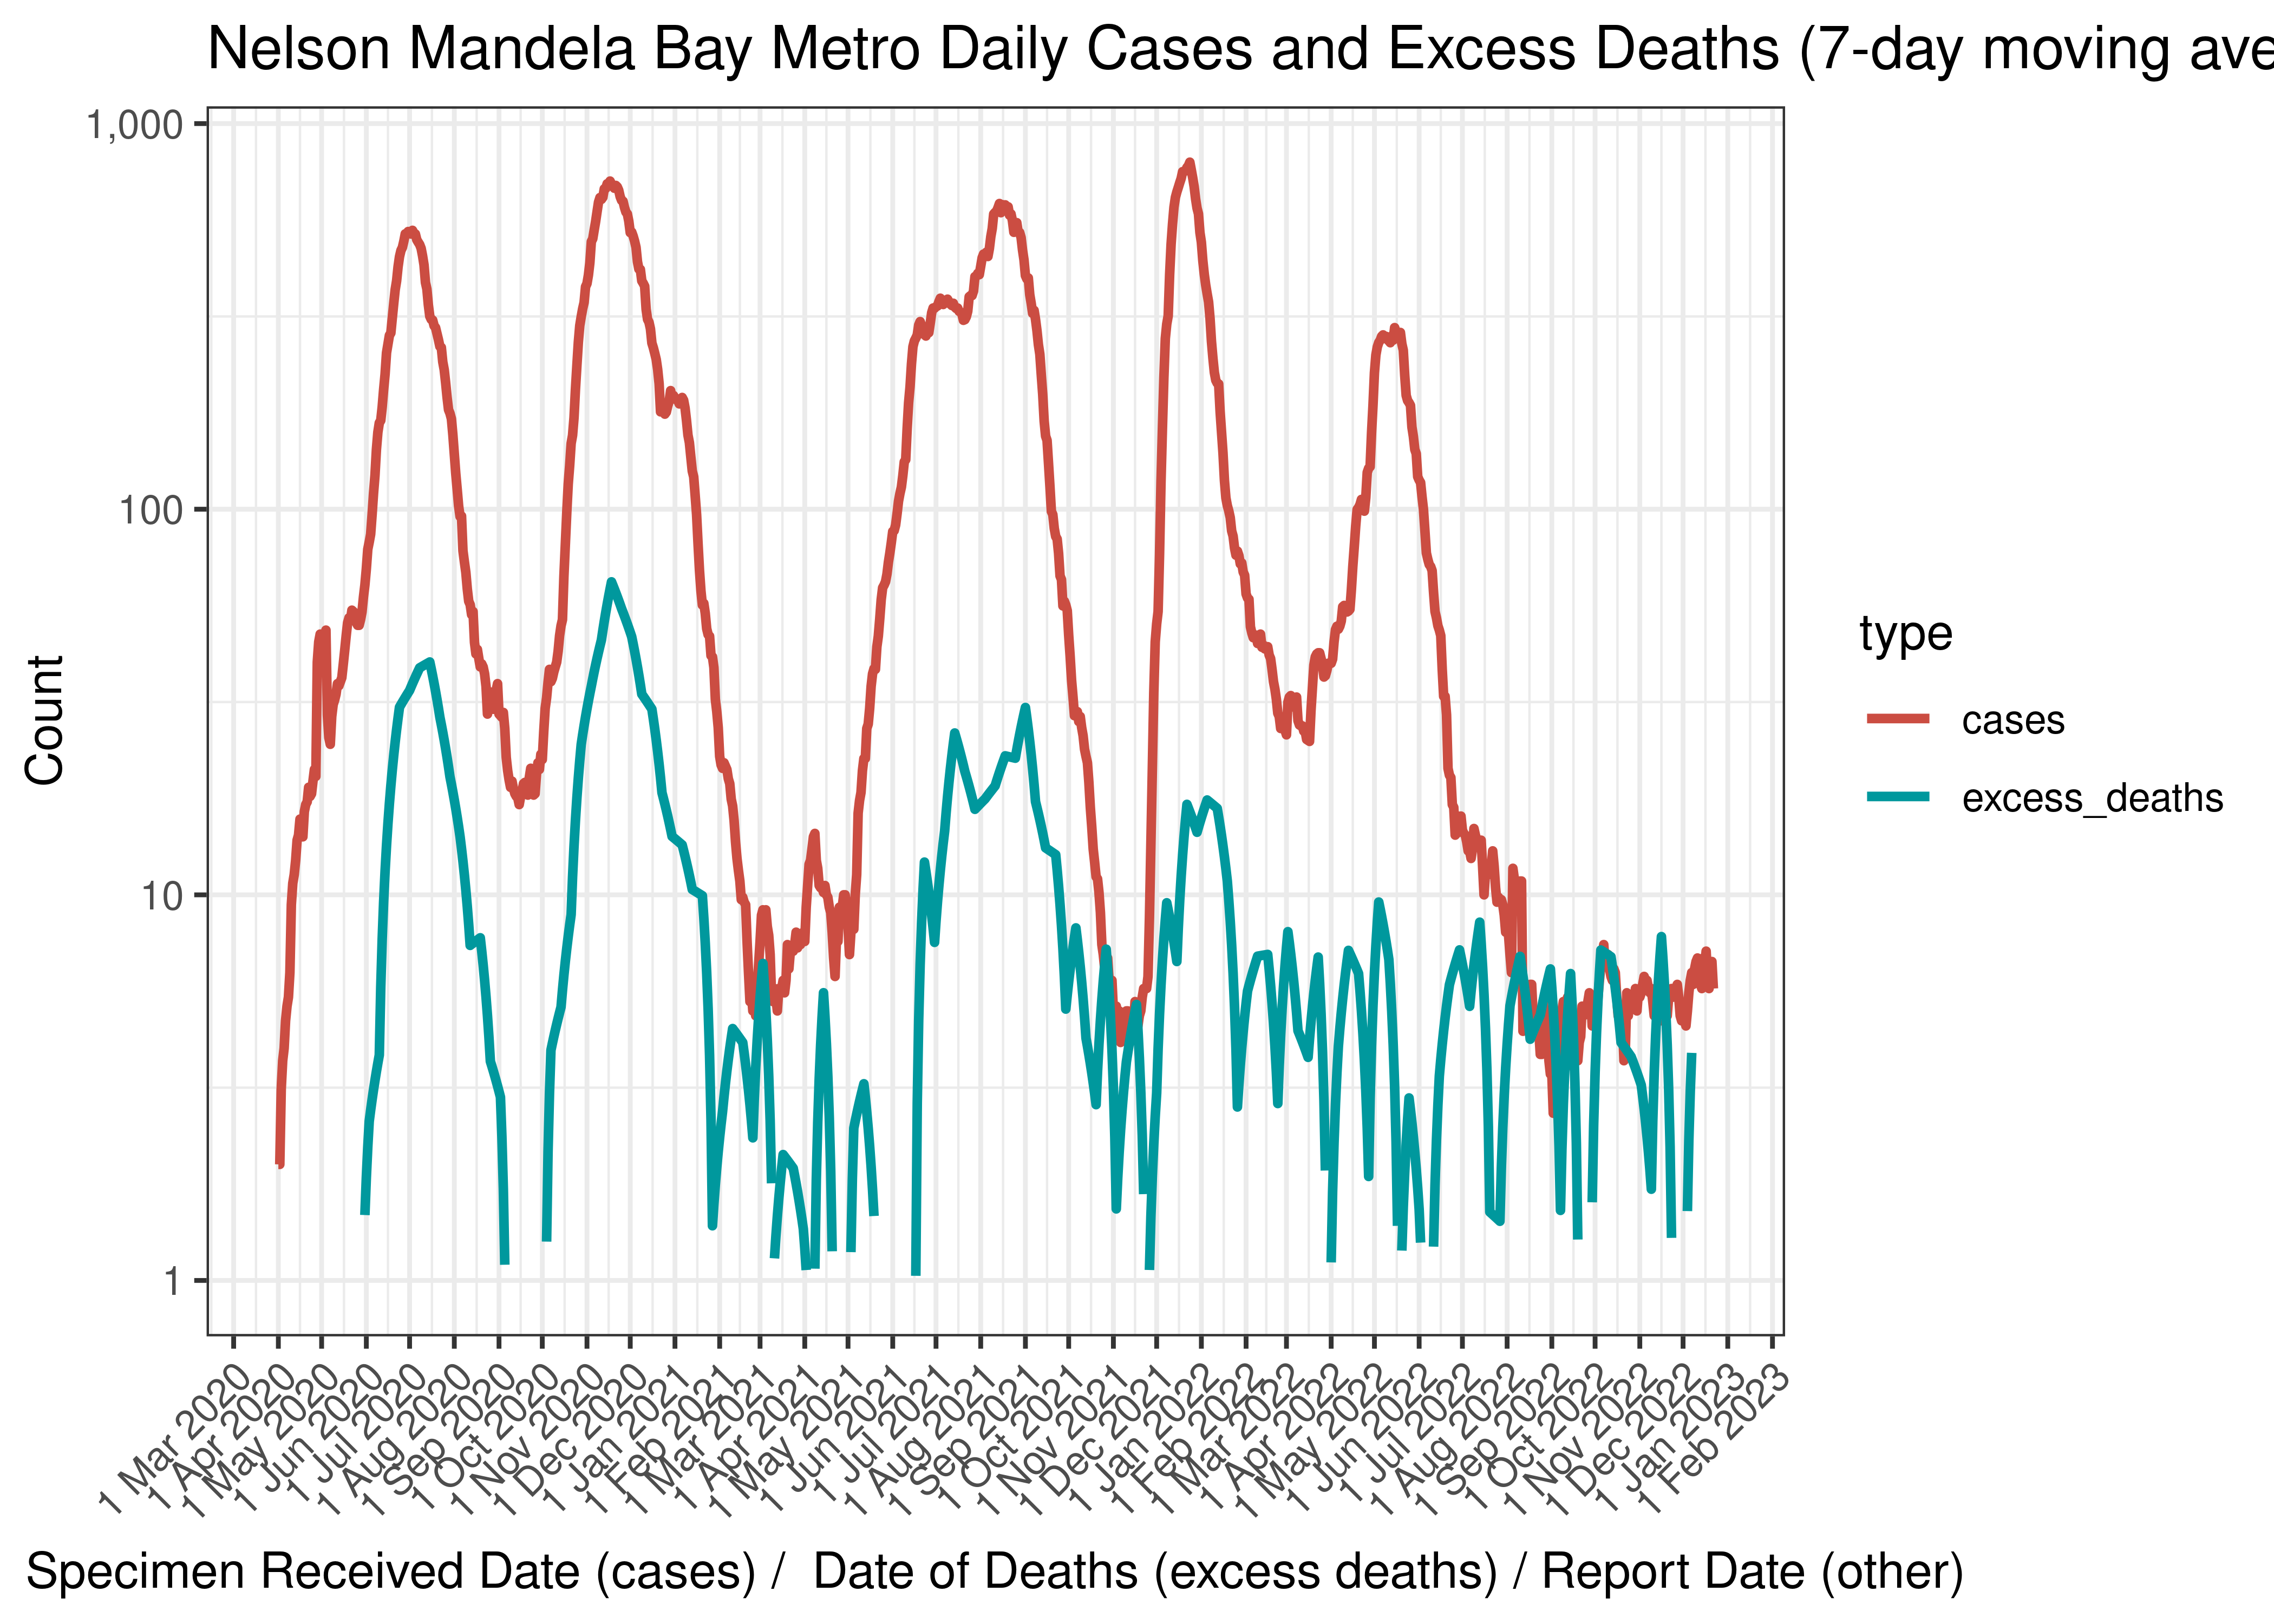 Nelson Mandela Bay Metro Daily Cases and Excess Deaths (7-day moving average)